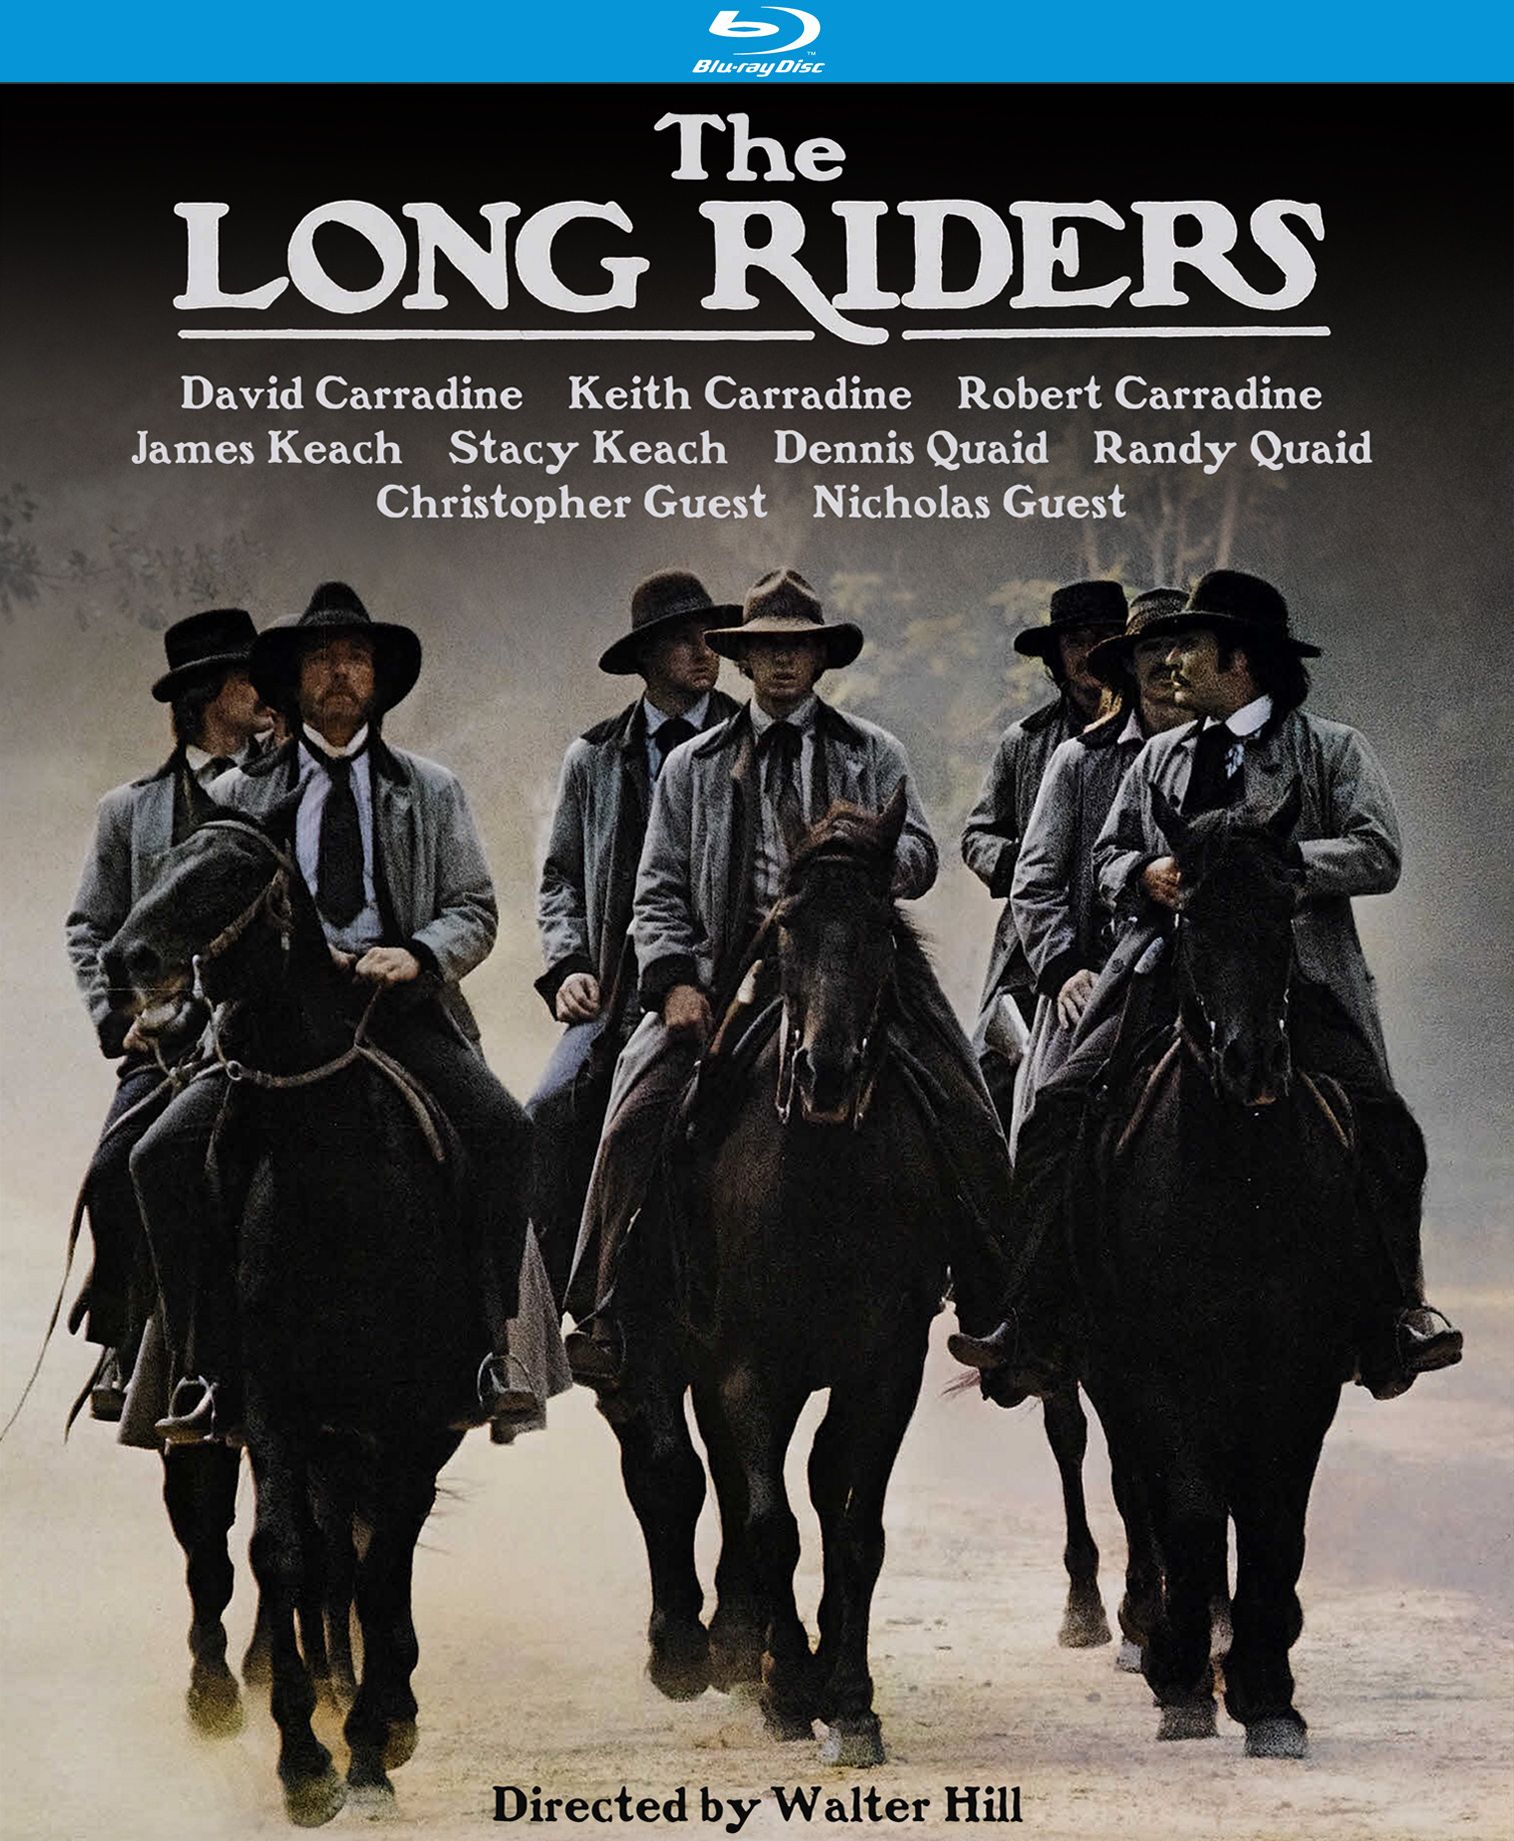 The Long Riders (2-Disc Special Edition) (Blu-ray) - Kino Lorber ...